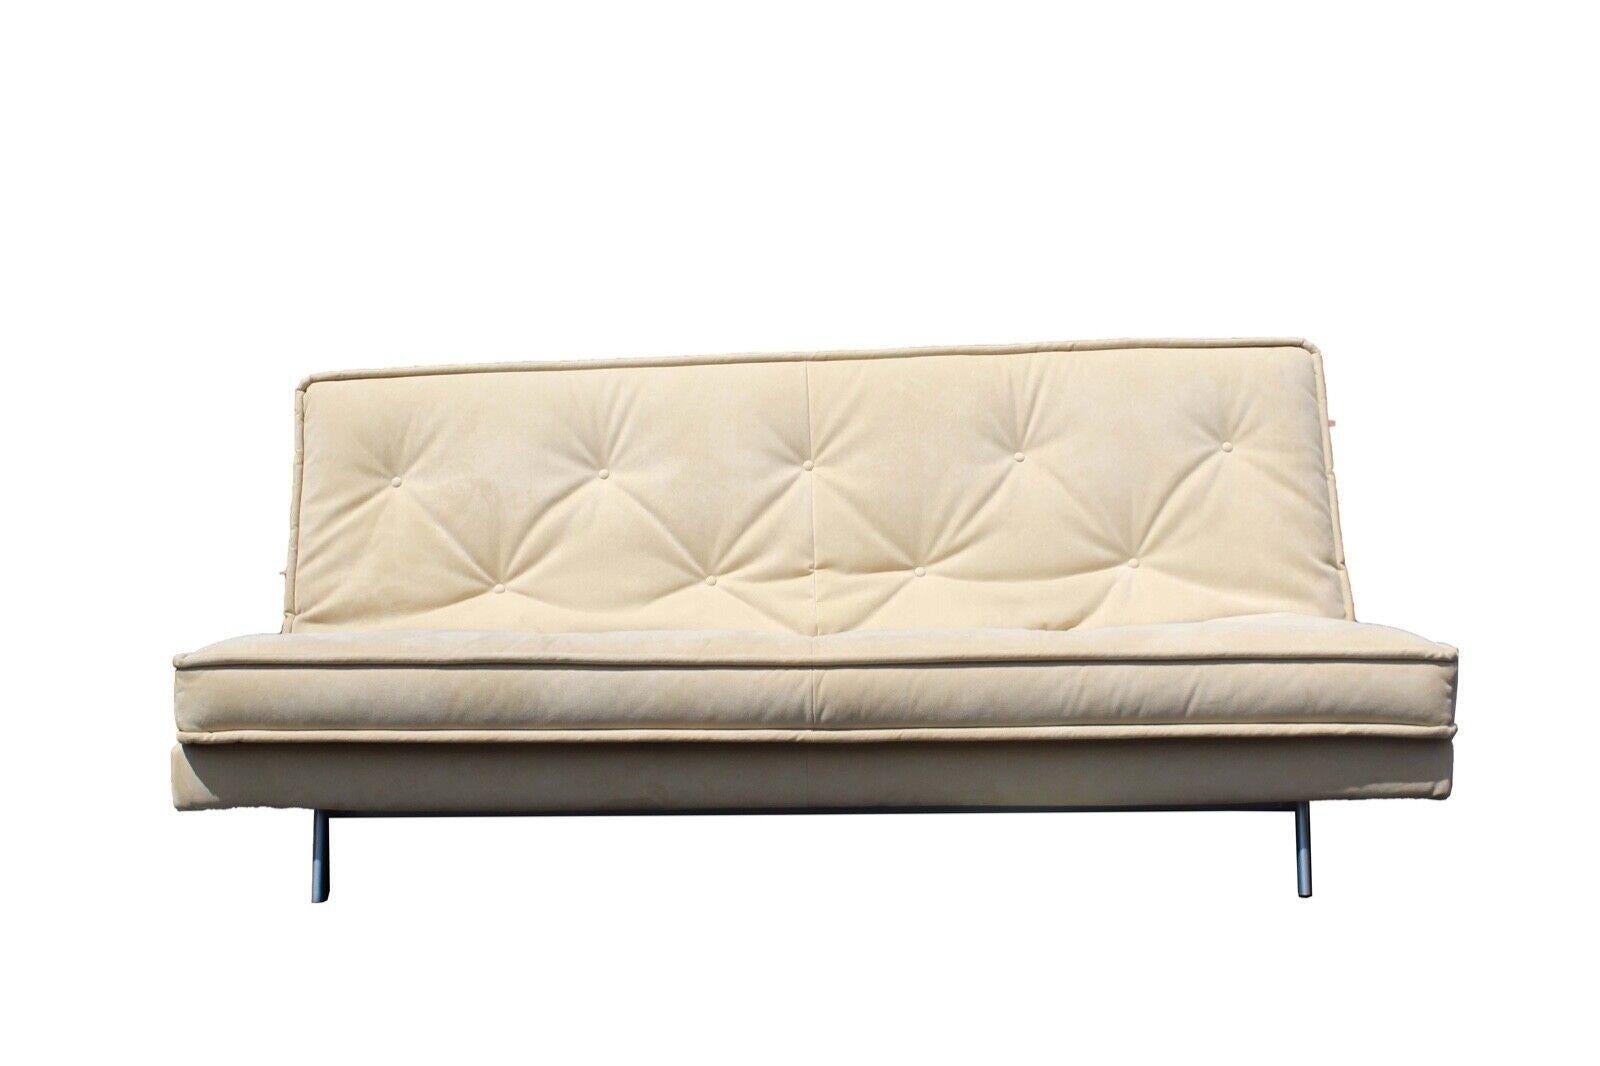 From Le Shoppe too is this beautiful futon sofa bed from Ligne Roset designed by Didier Gomez. It is done in their special microfiber fabric. In good condition. Dimensions: 80